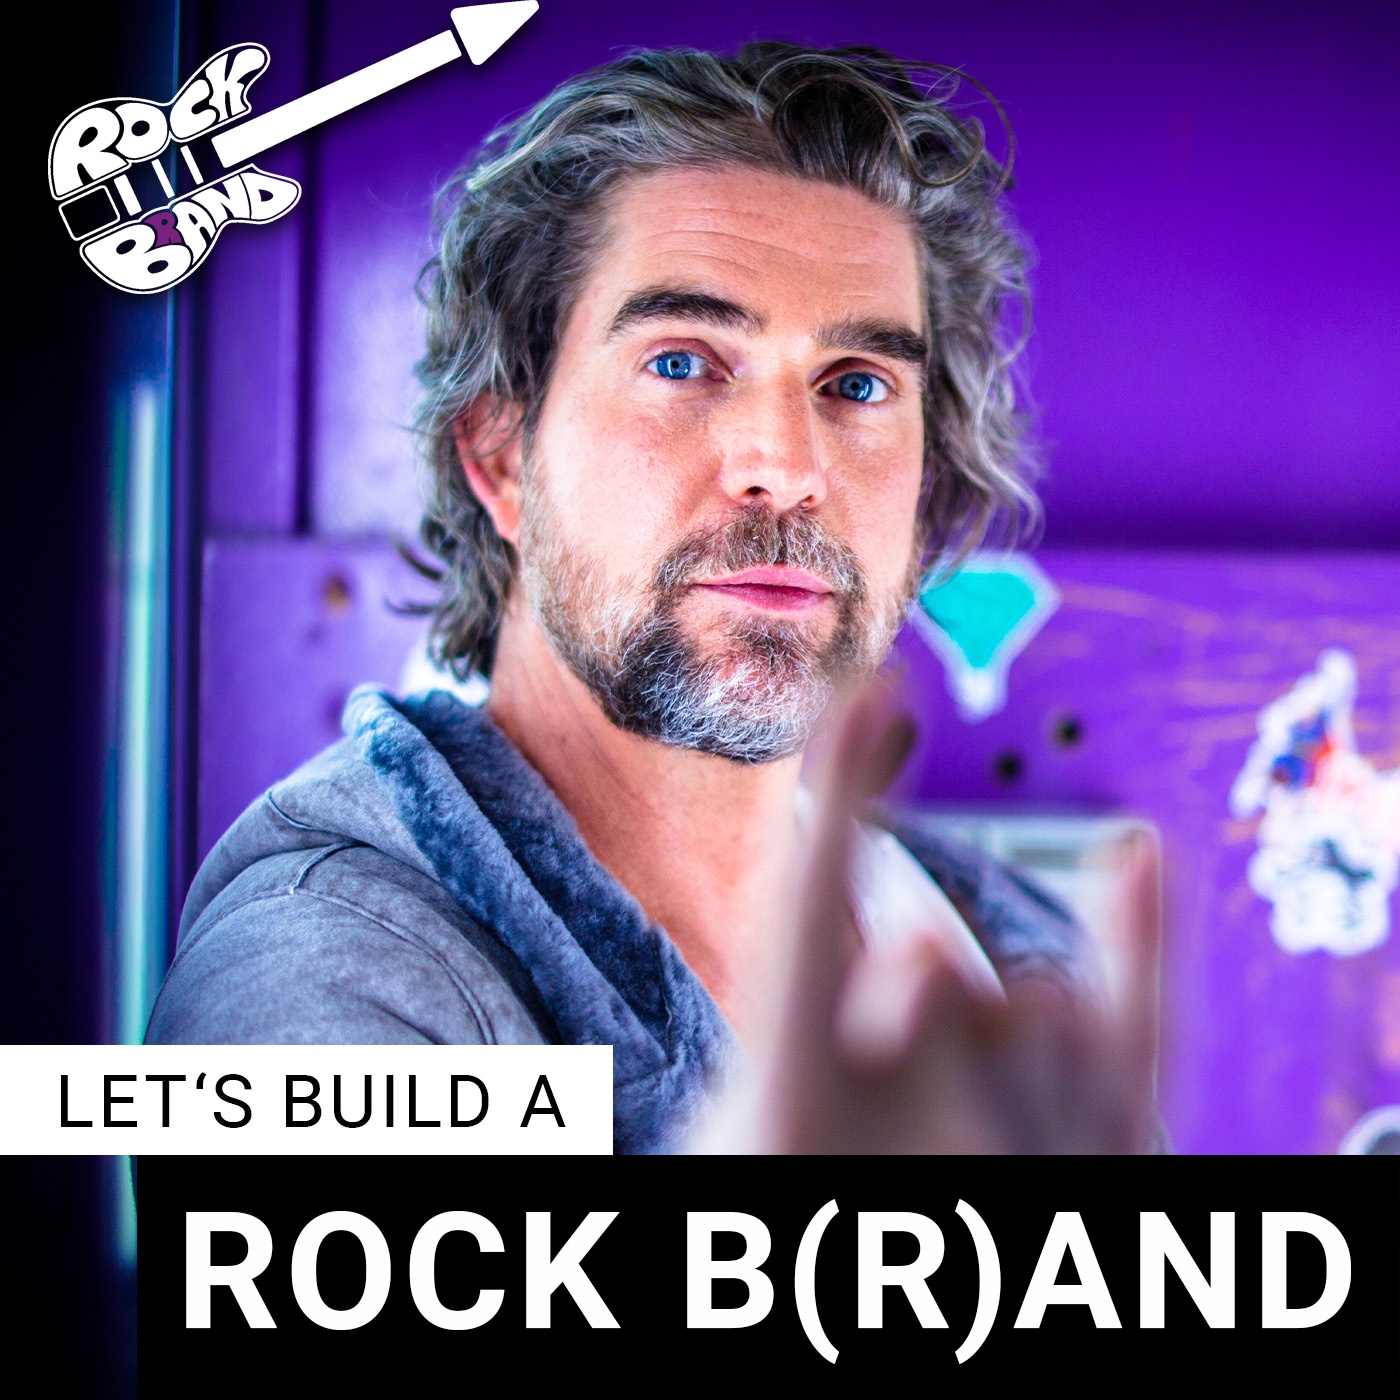 Let's build a Rock B(r)and! Der Start-up-Podcast